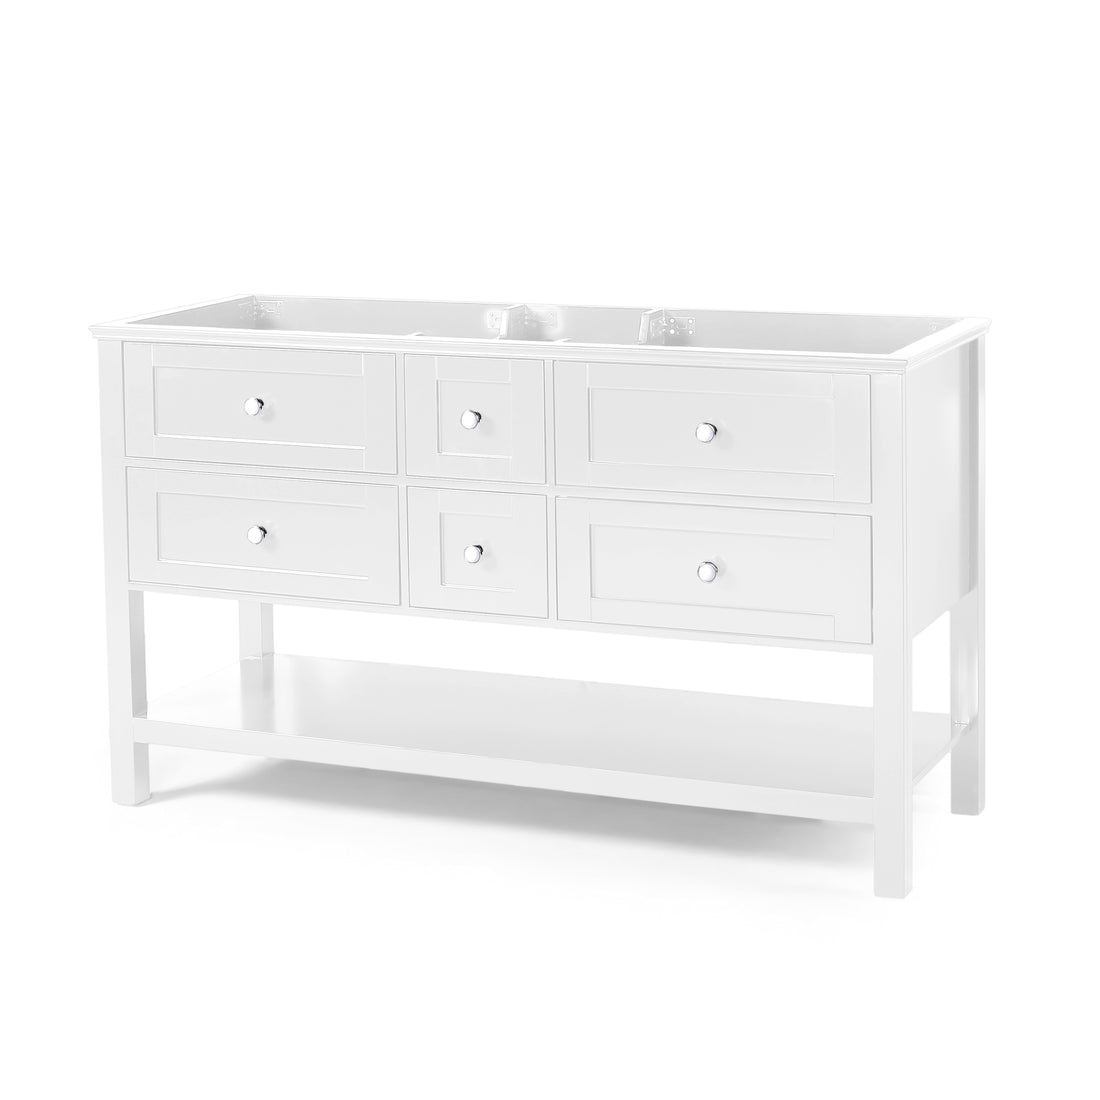 60'' Cabinet - White Plywood